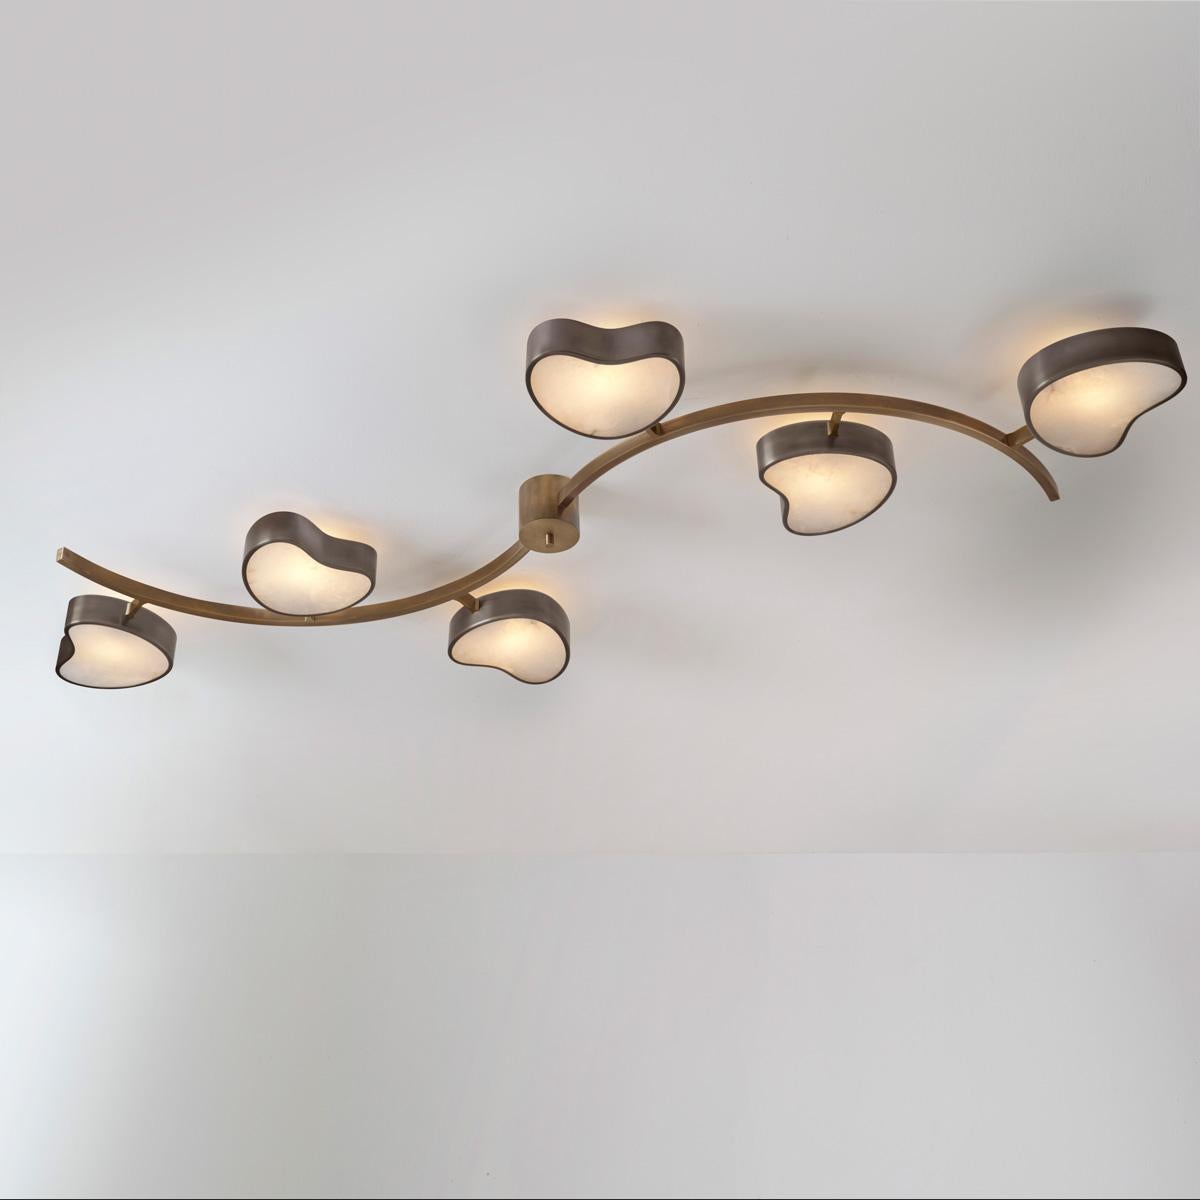 Cuore N.6 Ceiling Light by Gaspare Asaro. Peltro and Bronze Finish For Sale 3